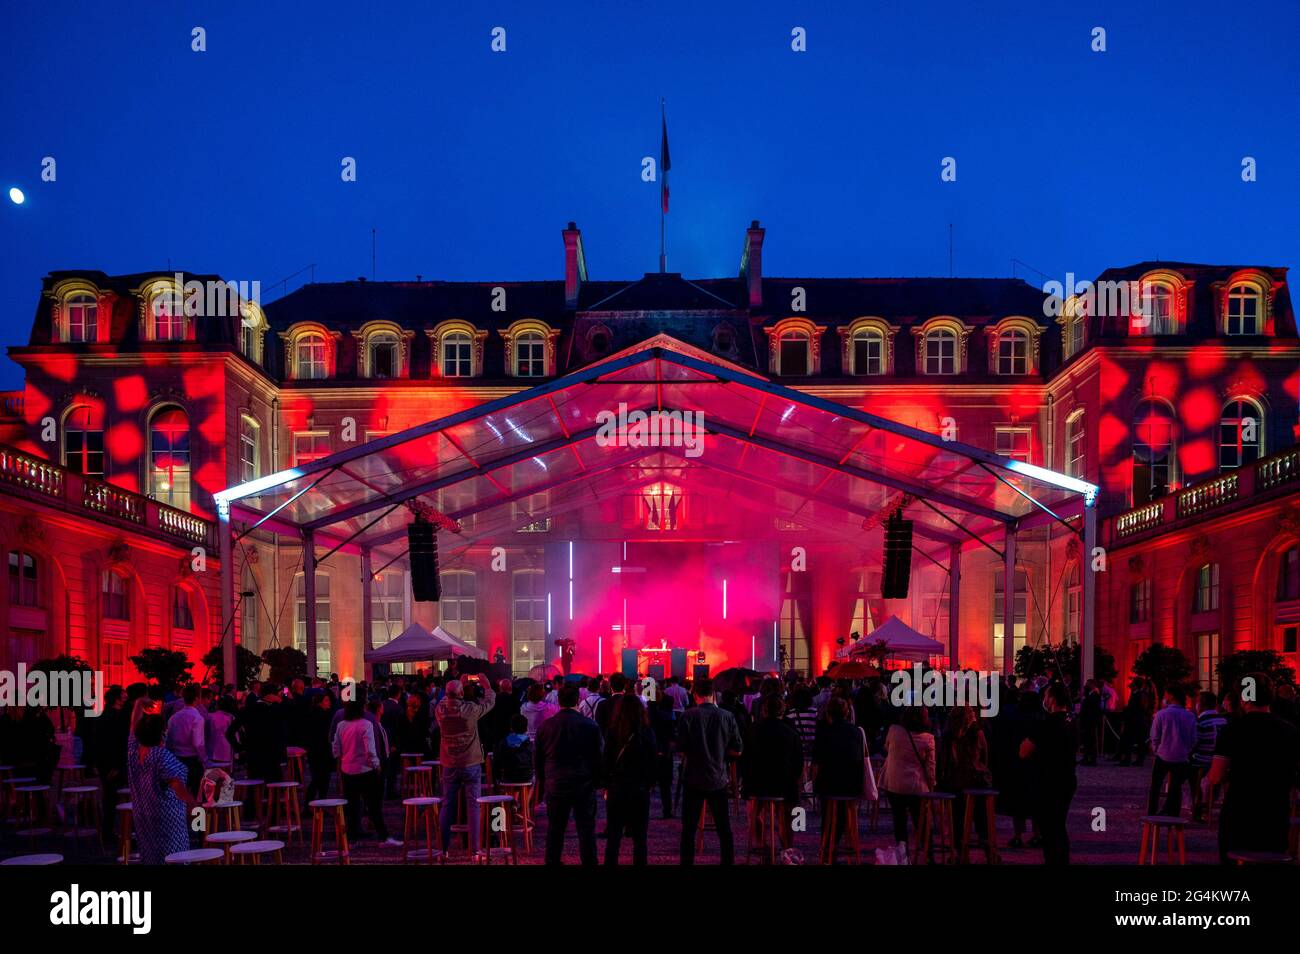 French music composer Jean-Michel Jarre performs at Fête de la Musique  concert, in the courtyard of the Elysee Palace, in Paris, France, on June  21, 2021. Photo by Ammar Abd Rabbo/ABACAPRESS.COM Credit: